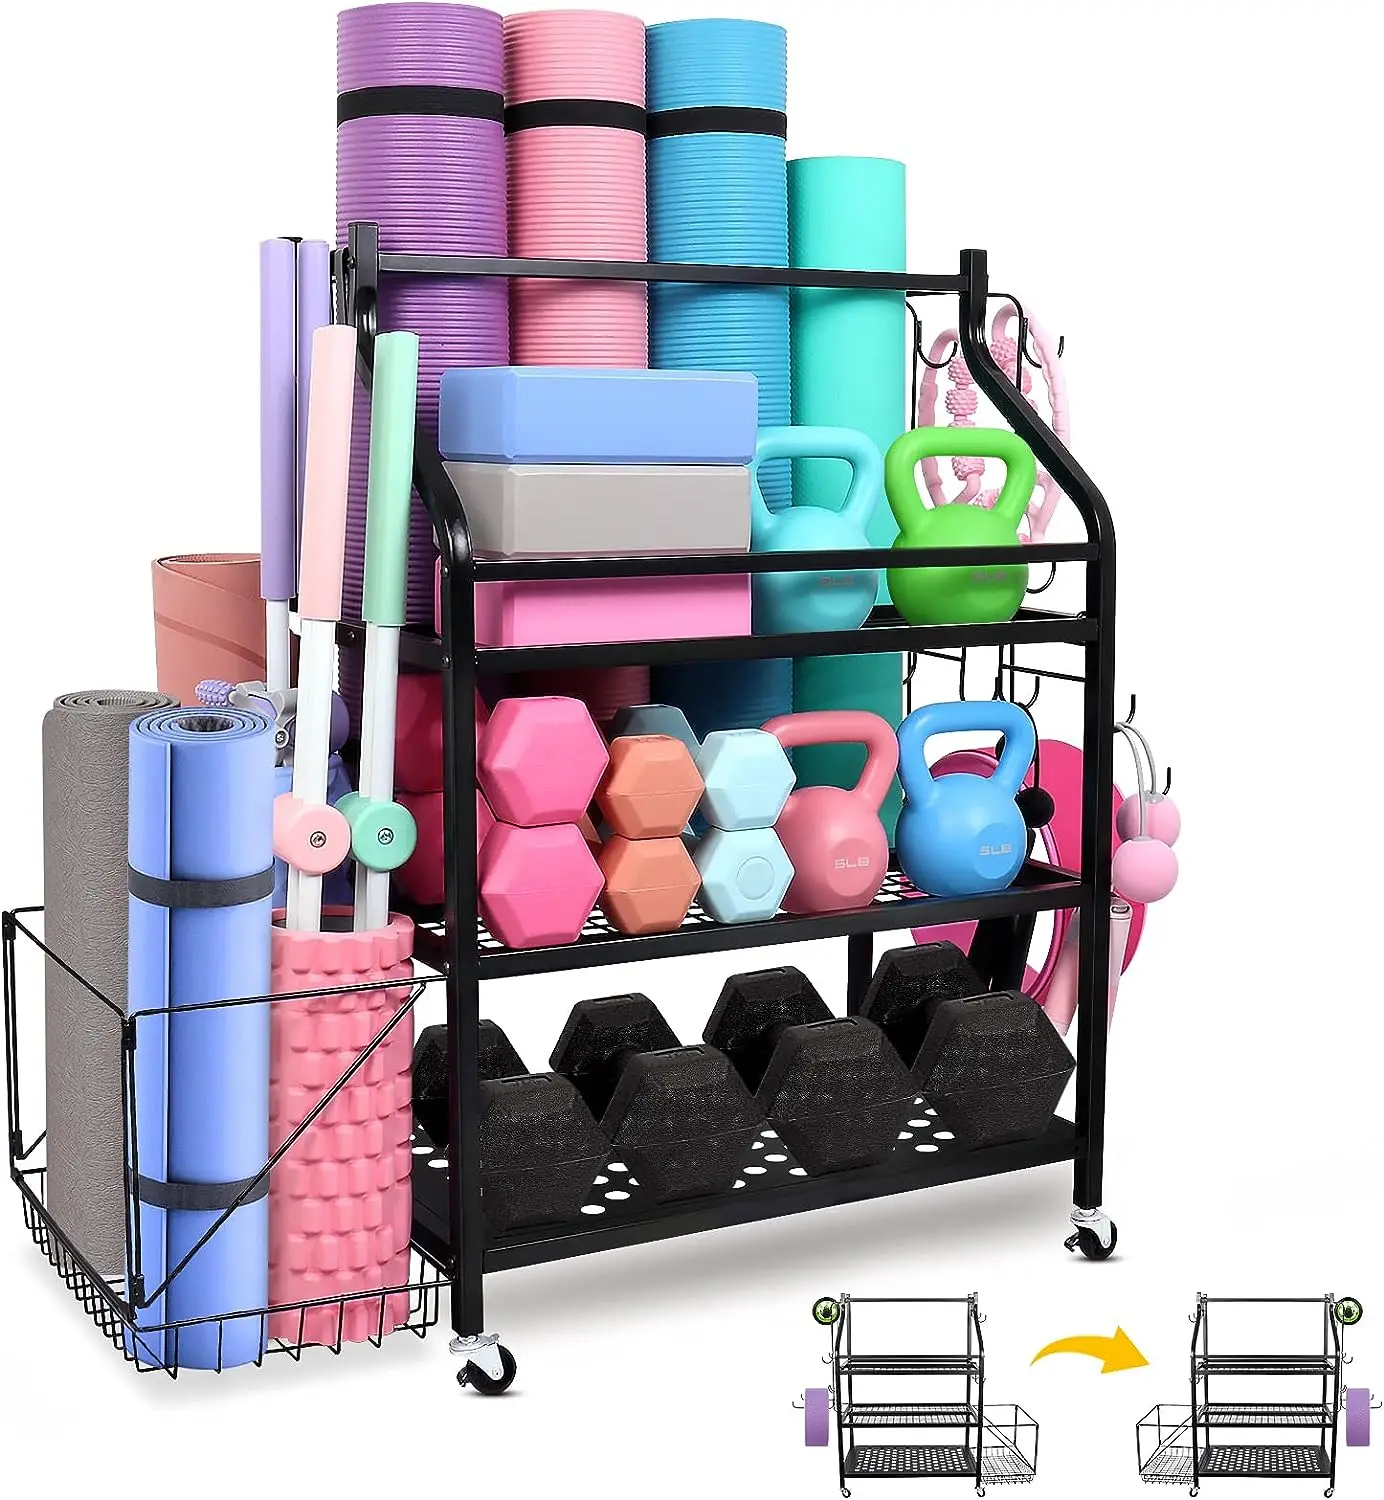 

Gym Storage - Heavy Duty Yoga Mat Storage , Weight Stand for Dumbbells On Wheels with Extra Side Storage Space & Hooks,Util